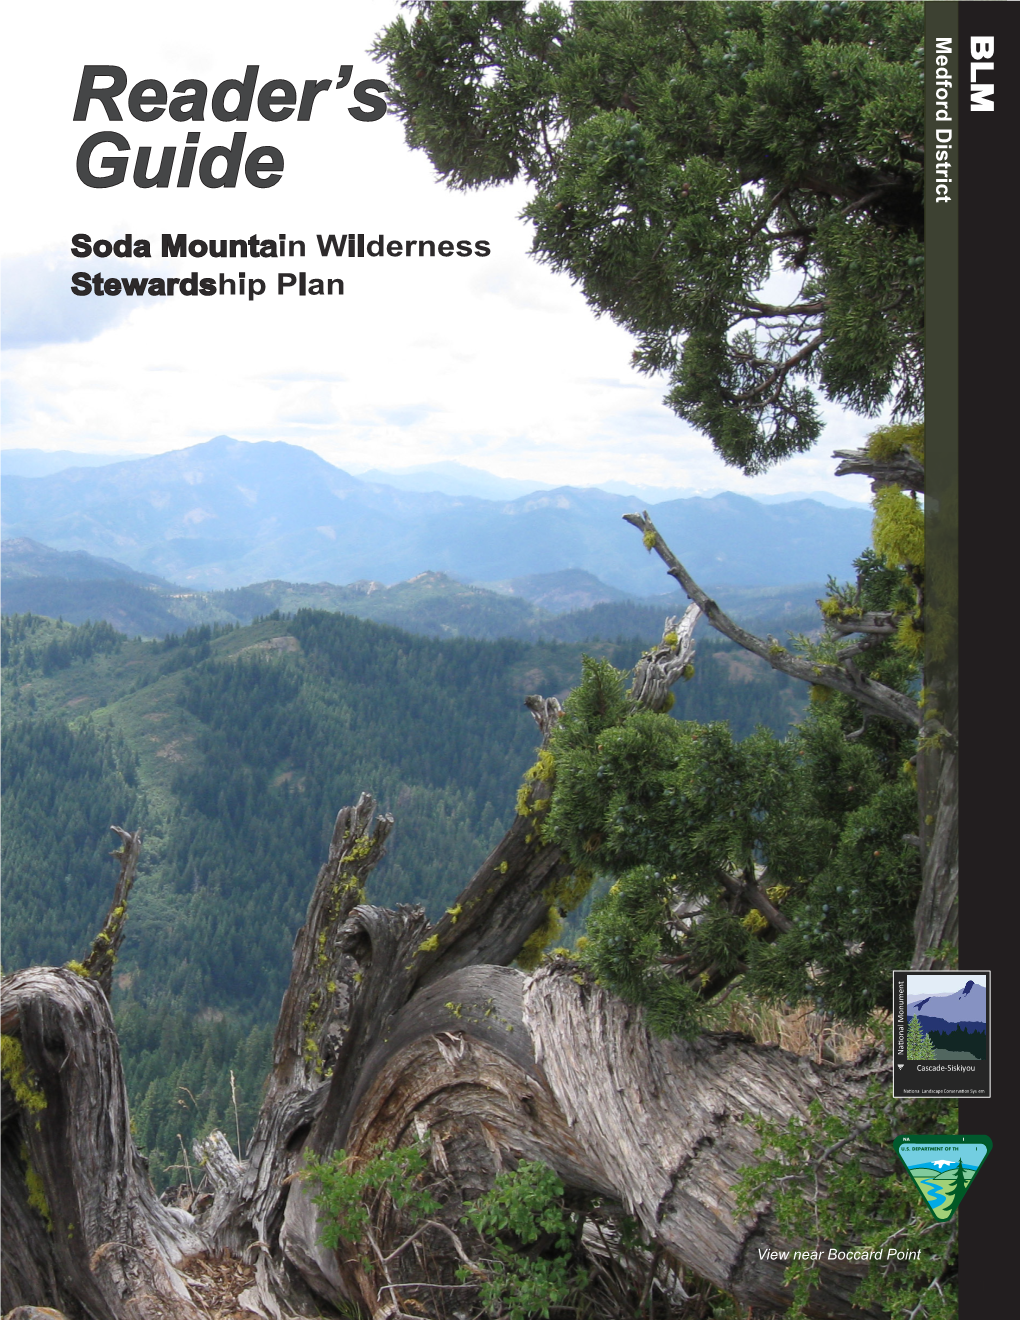 Reader's Guide for the Soda Mountain Wilderness Final Stewardship Plan